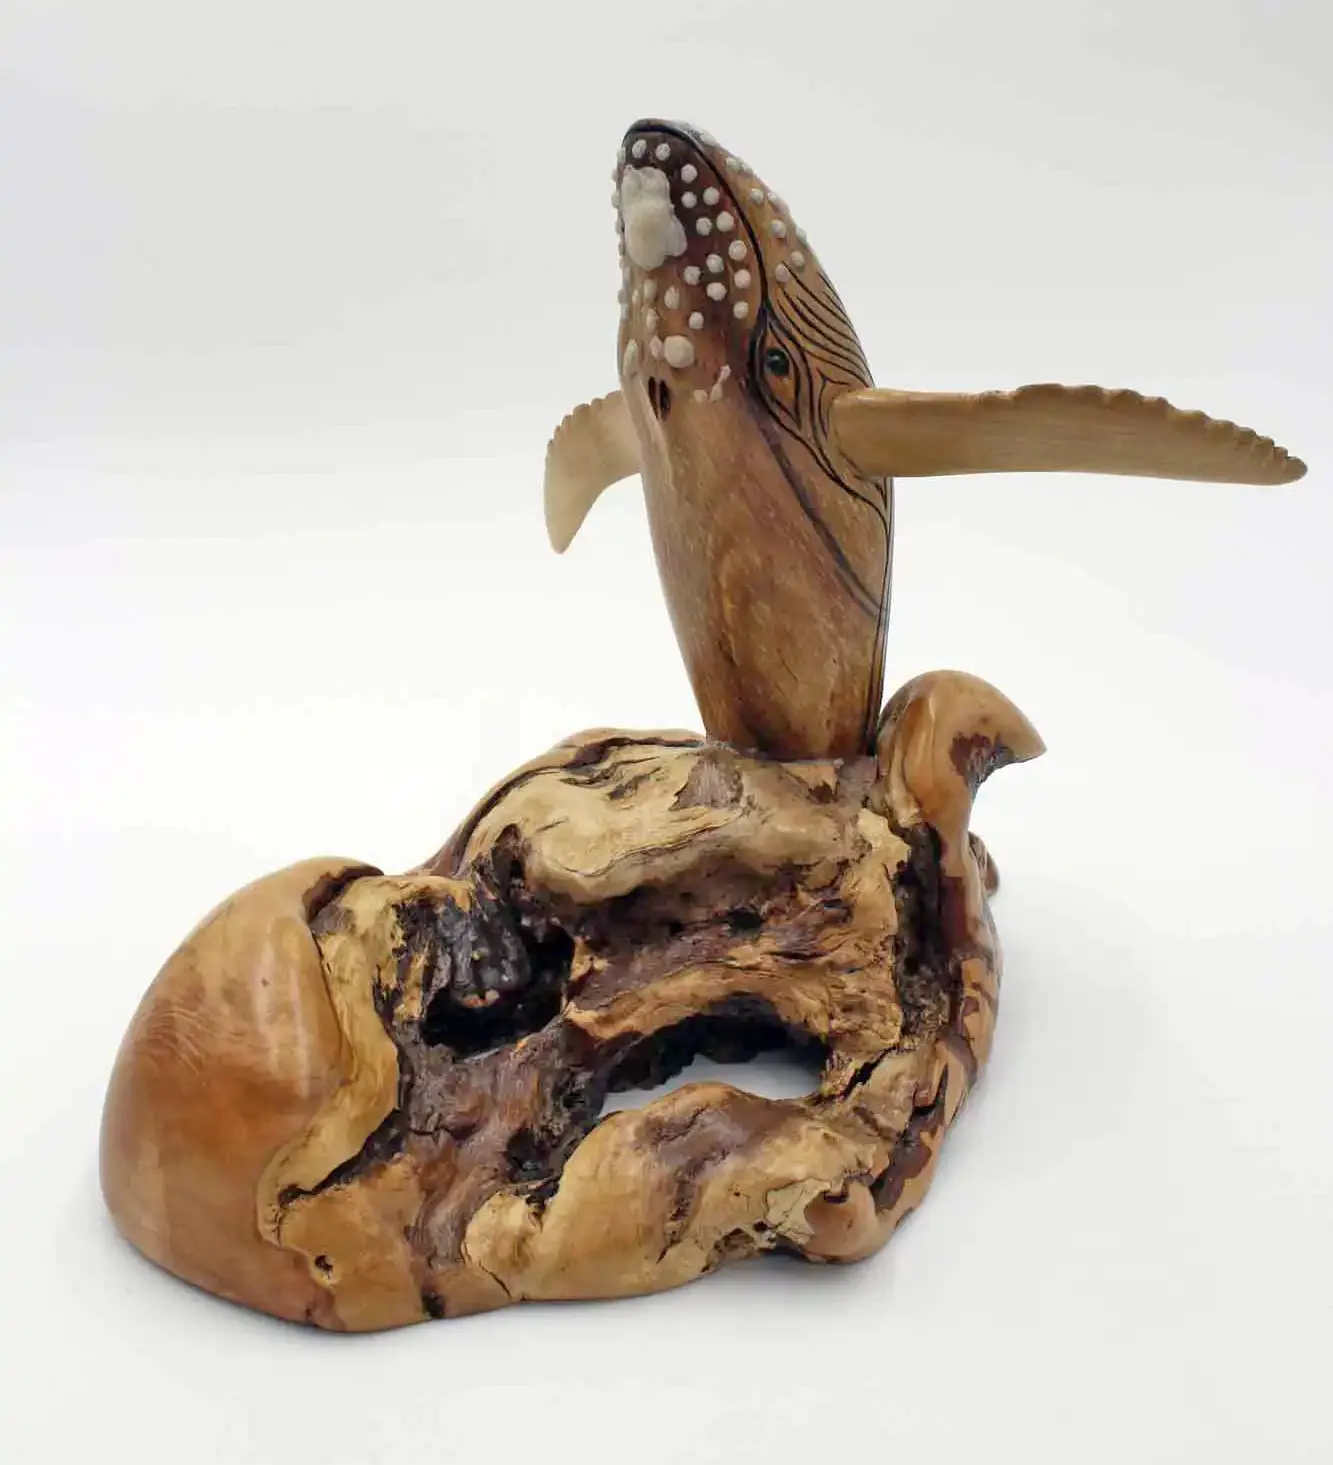 Humpback Whale woodcarving sculpture